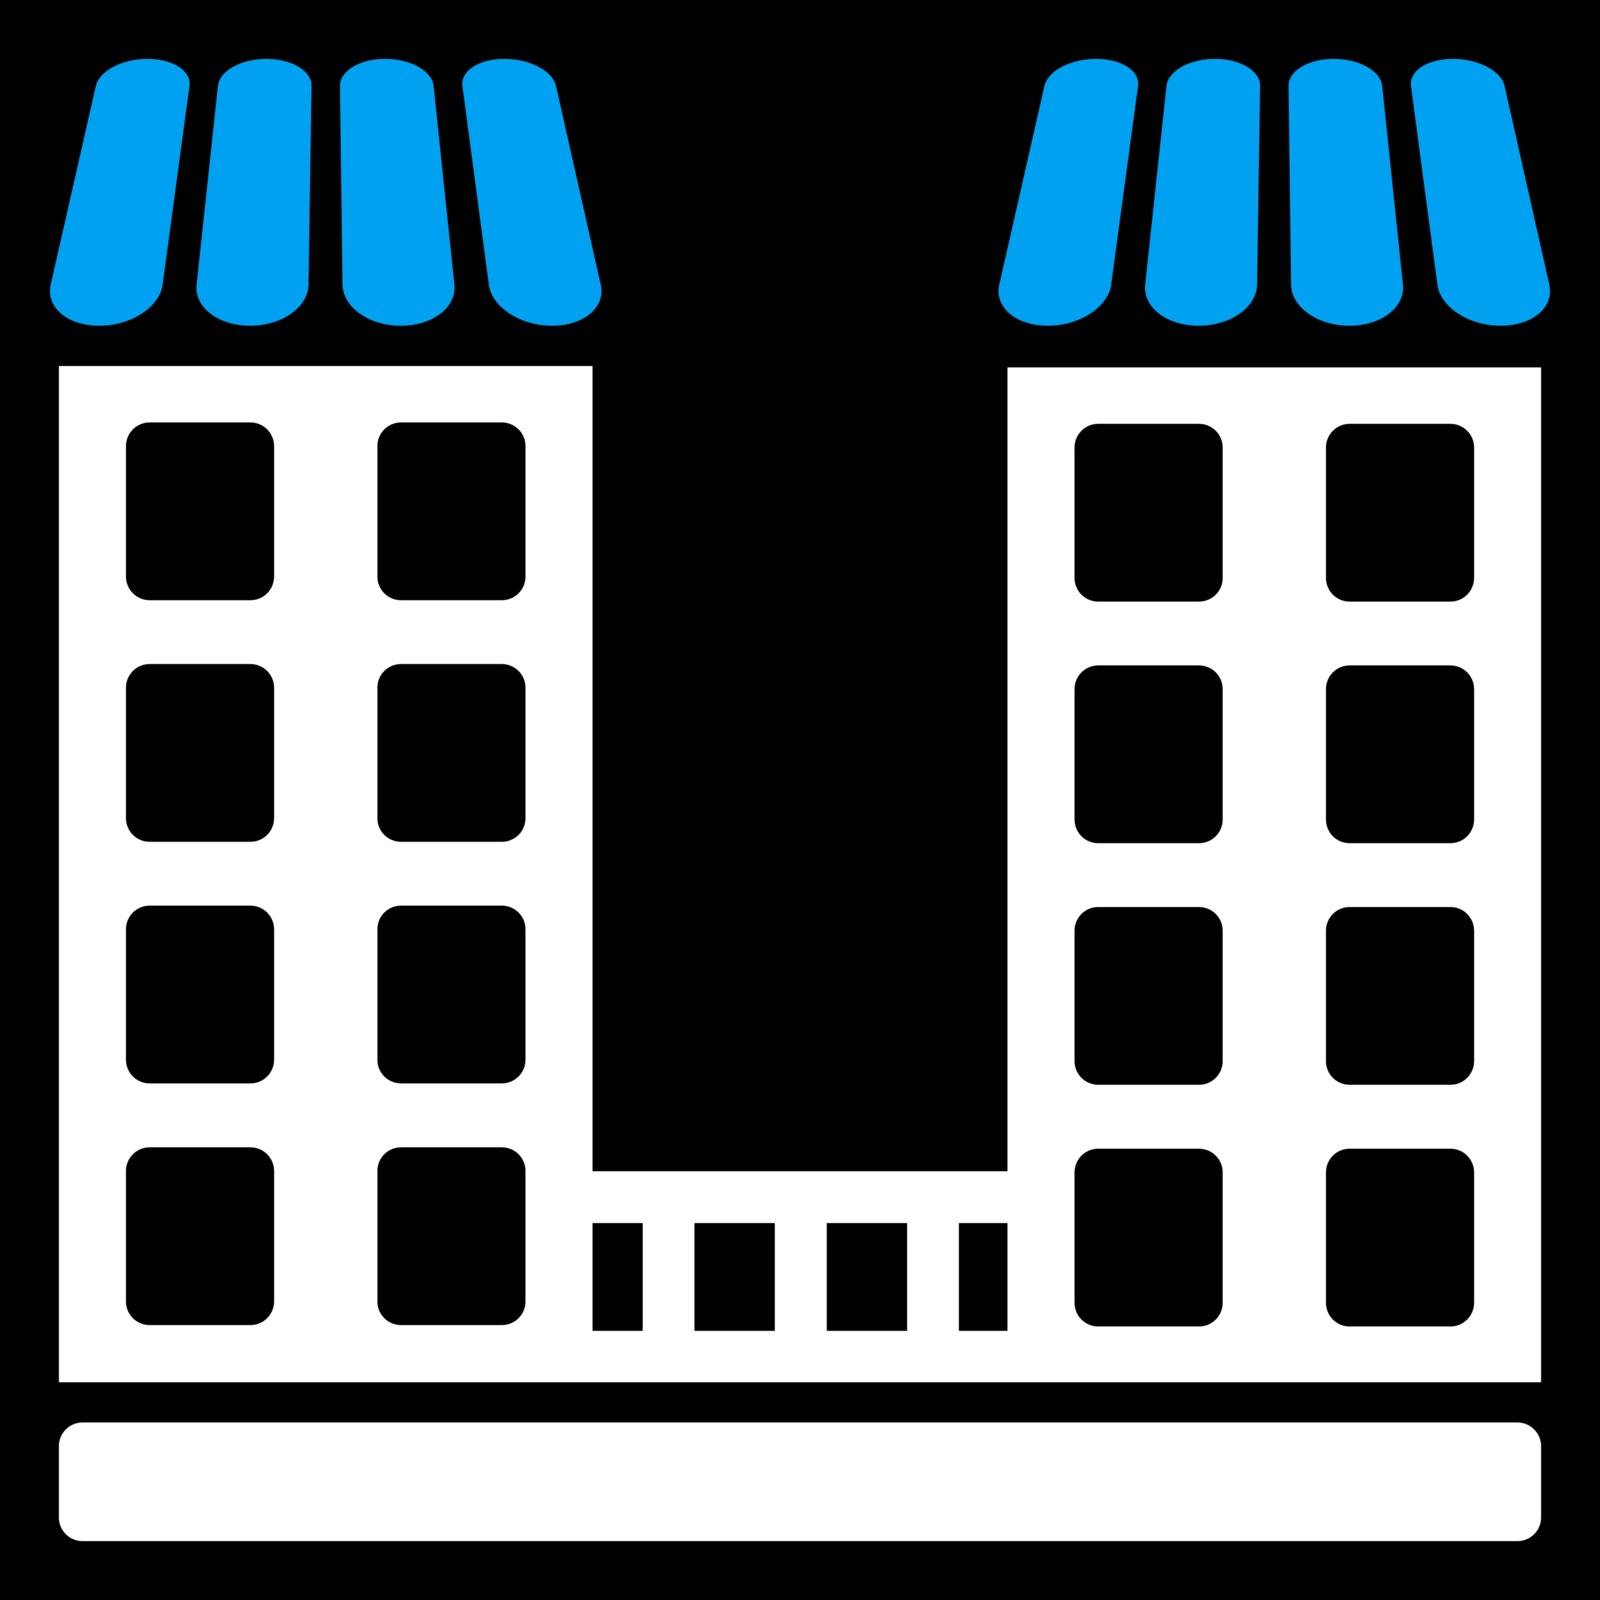 Company icon. This flat vector symbol uses blue and white colors, rounded angles, and isolated on a black background.